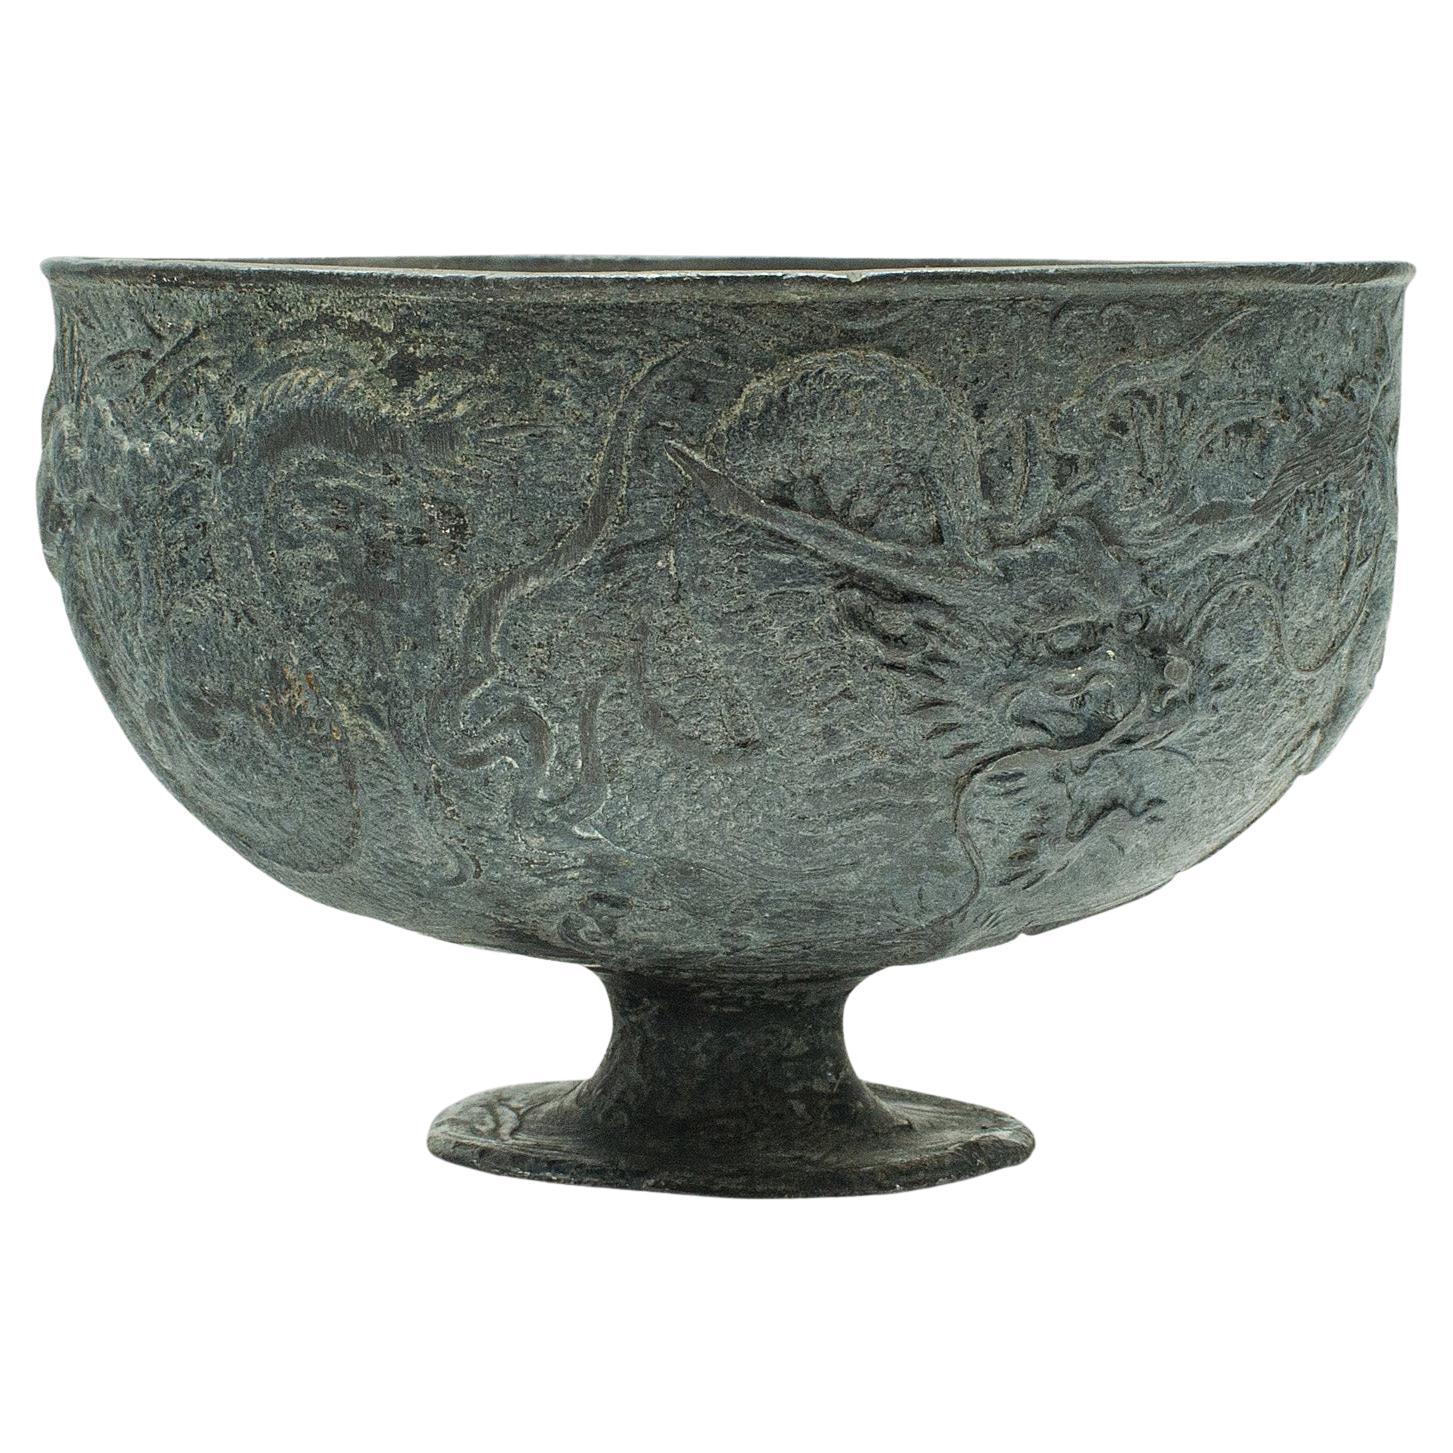 Antique Libation Cup, Chinese, Lead Alloy, Decorative Bowl, Victorian, C.1880